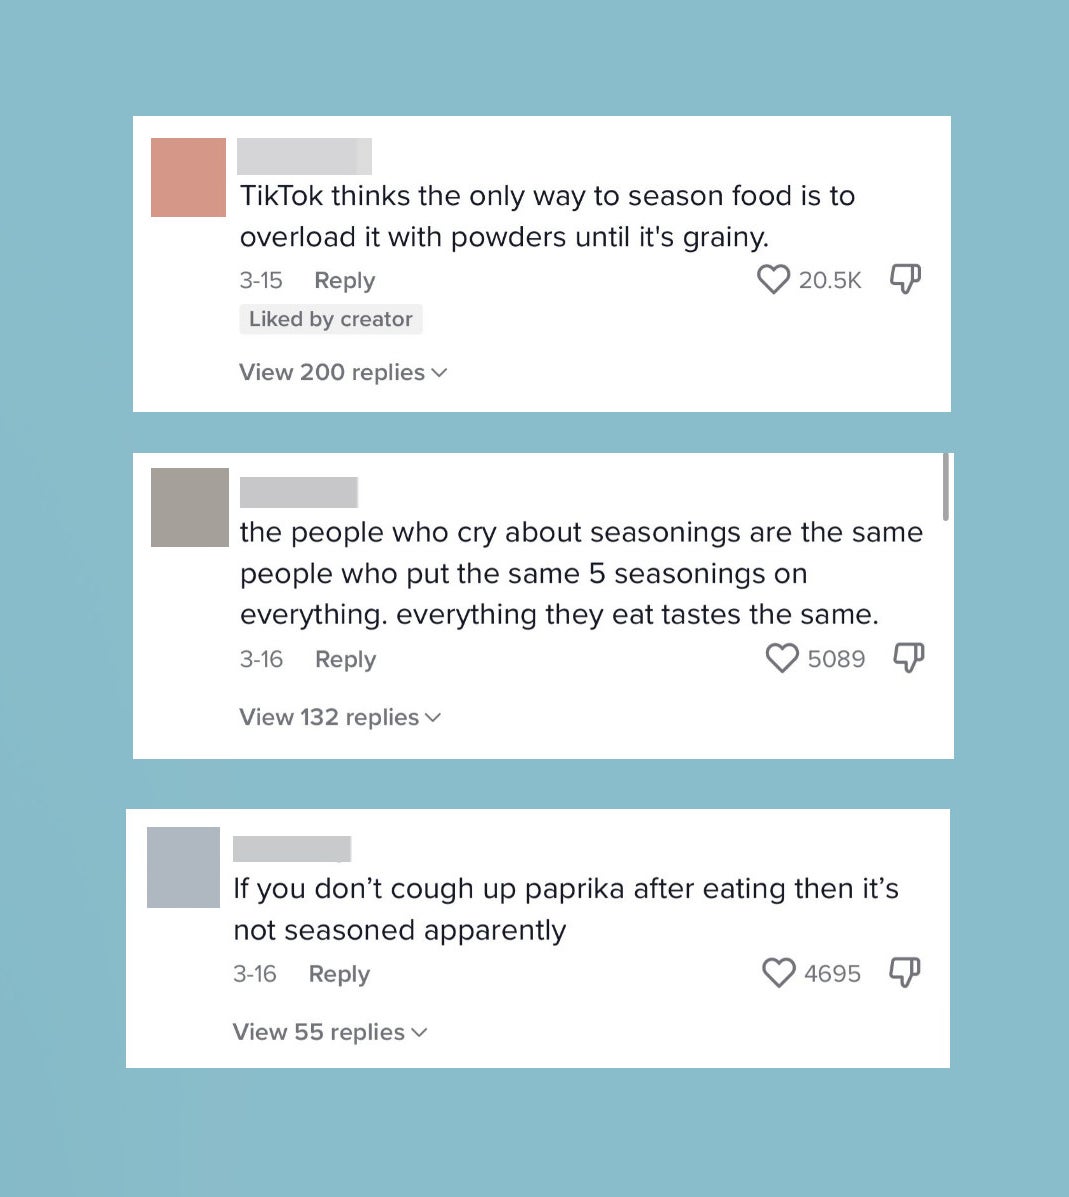 Various comments from the TikTok that are positive, including &quot;TikTok thinks the only way to season food is to overload it with powders until it&#x27;s grainy&quot;